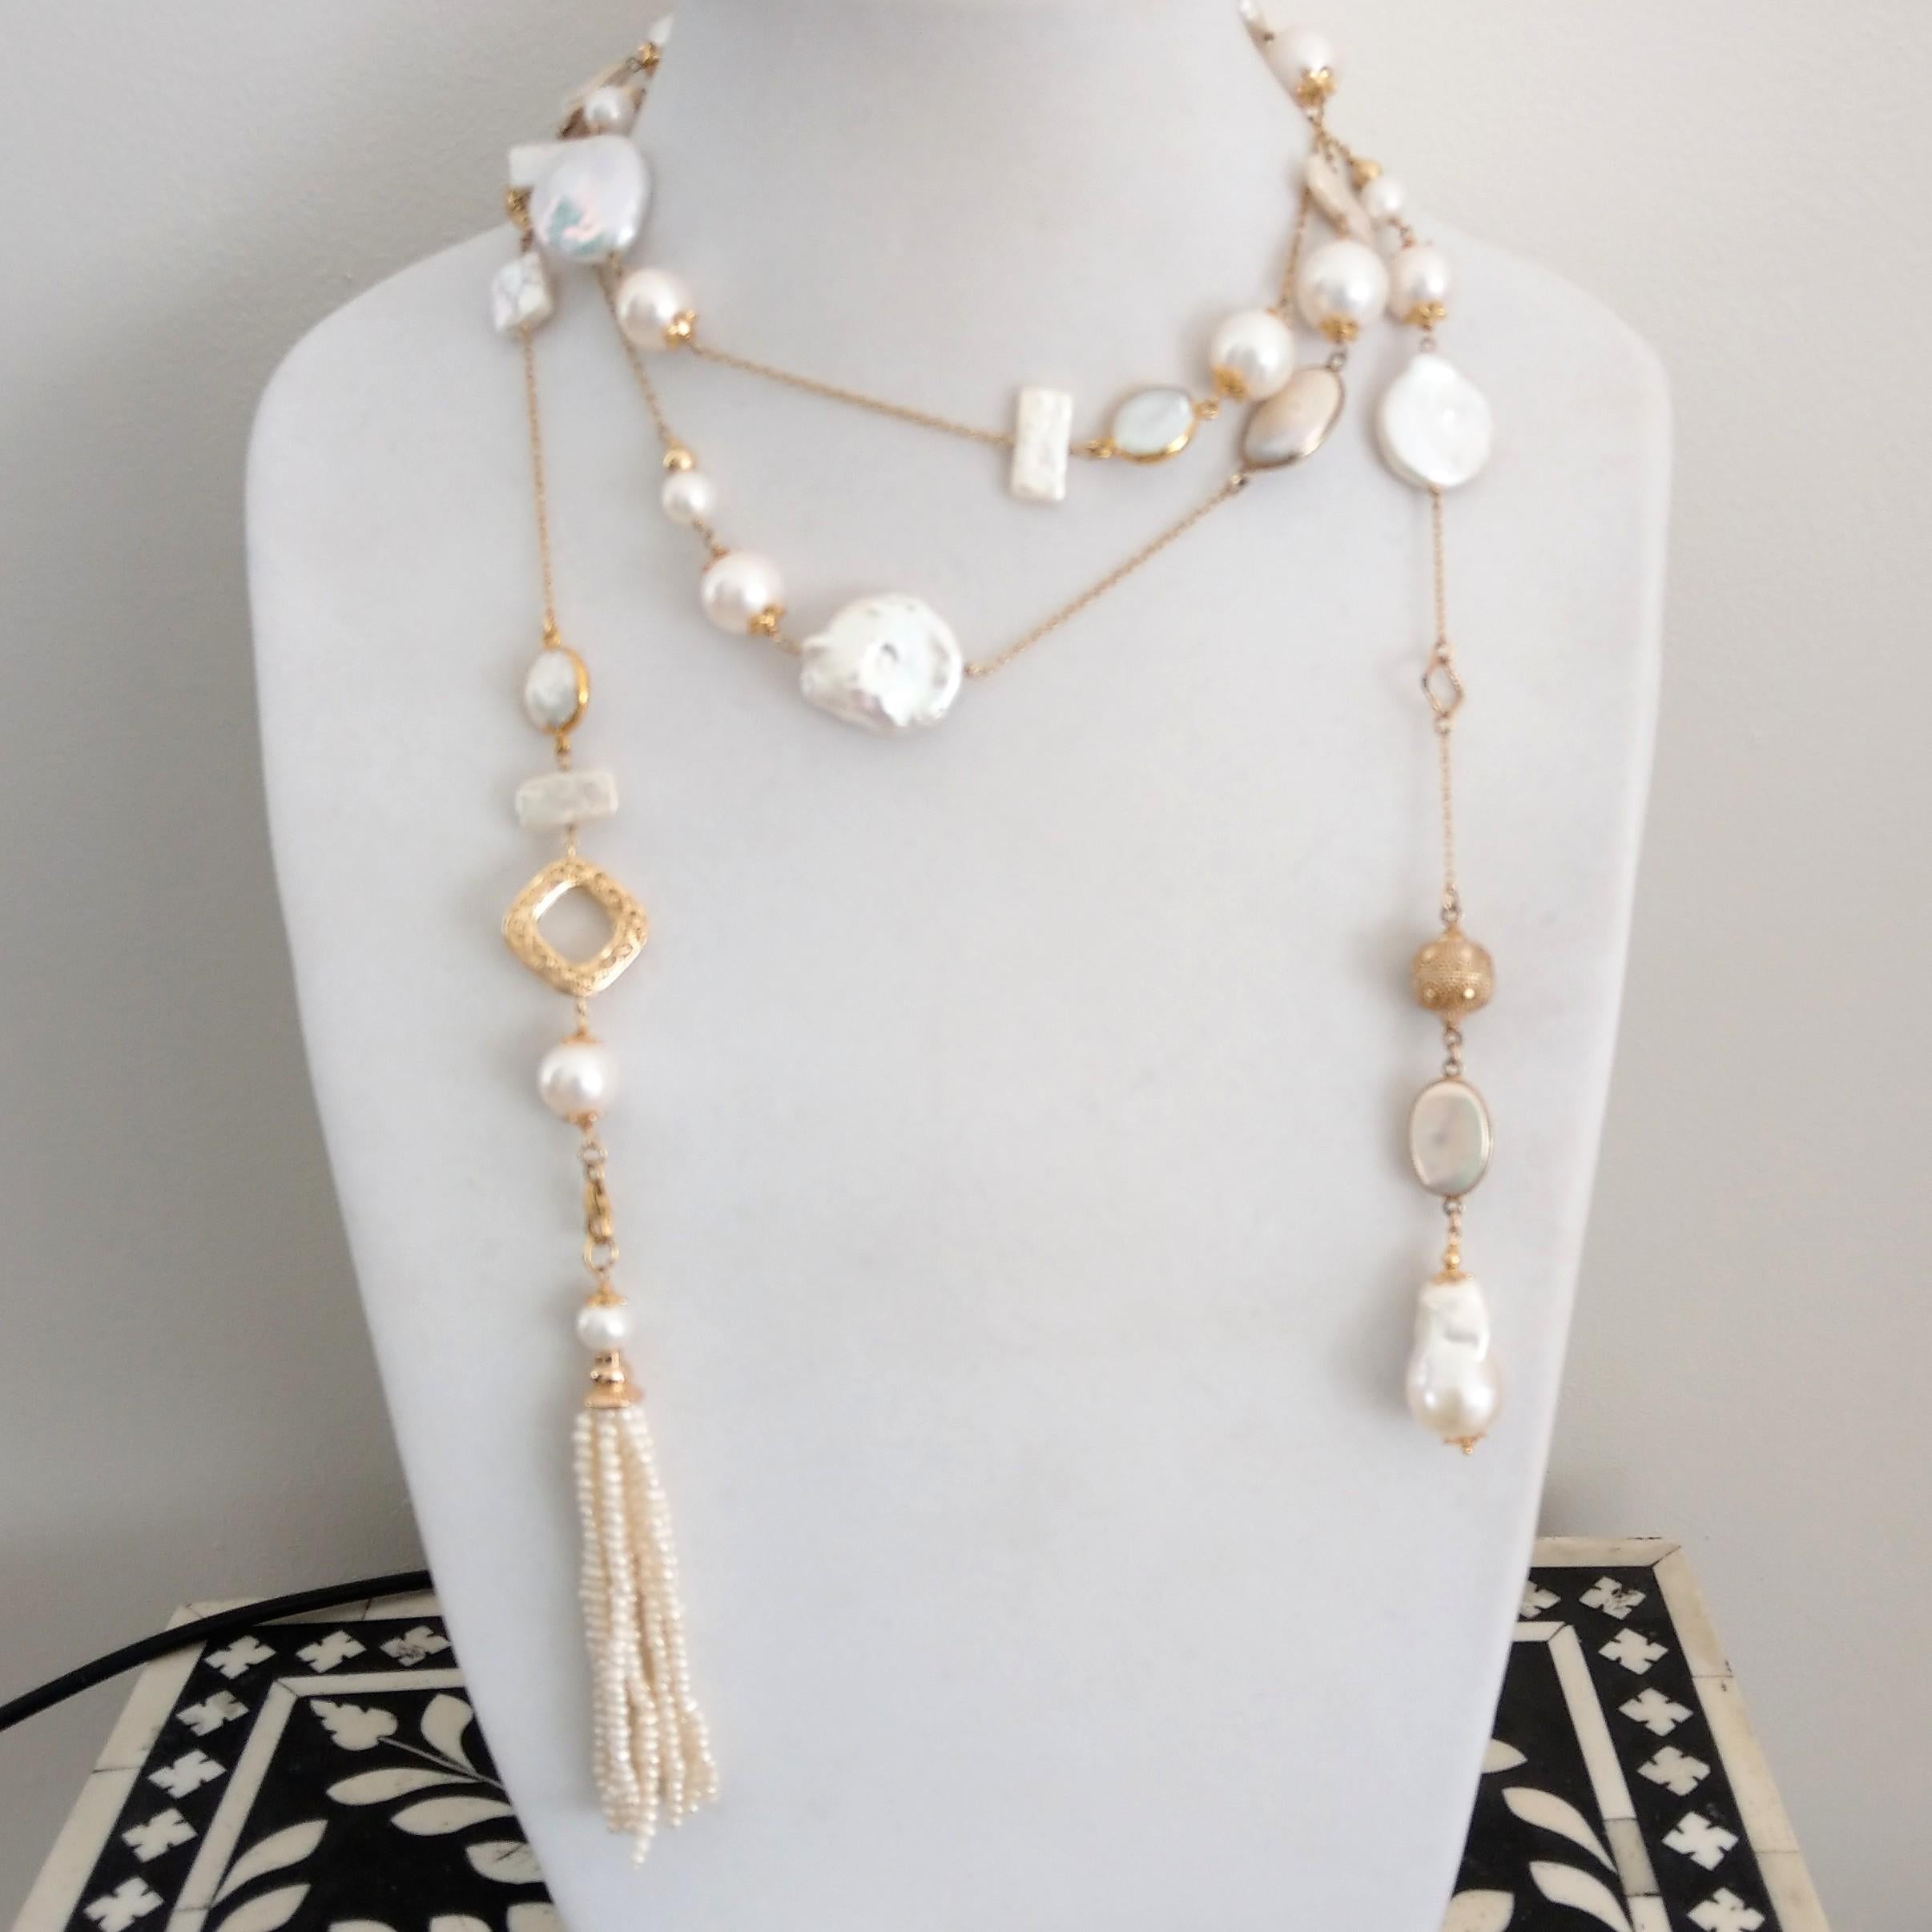 Bead Decadent Jewels Baroque Pearl Gold Chain Lariat Multi Style Tassel Necklace